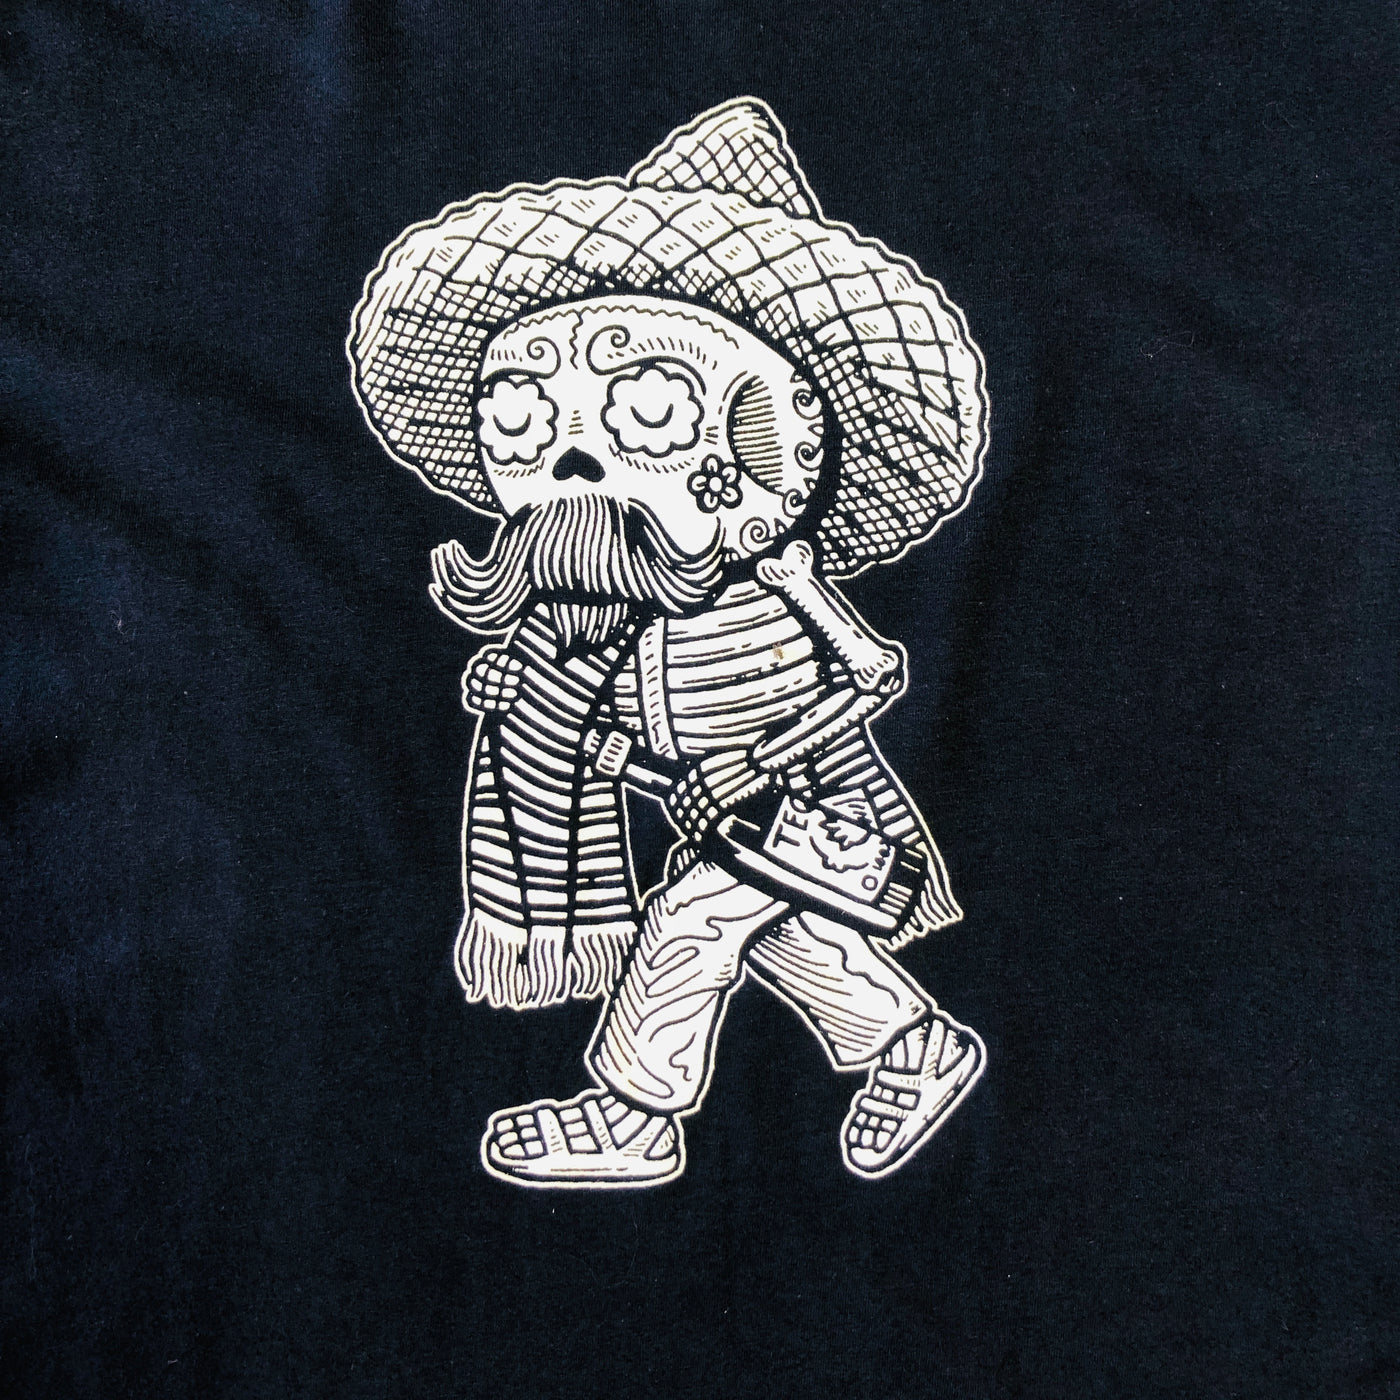 Close up of Men's Borracho Calavera graphic. T-shirt is navy blue with white accents. Design features skeleton with sombrero, serape, and a bottle of tequila.